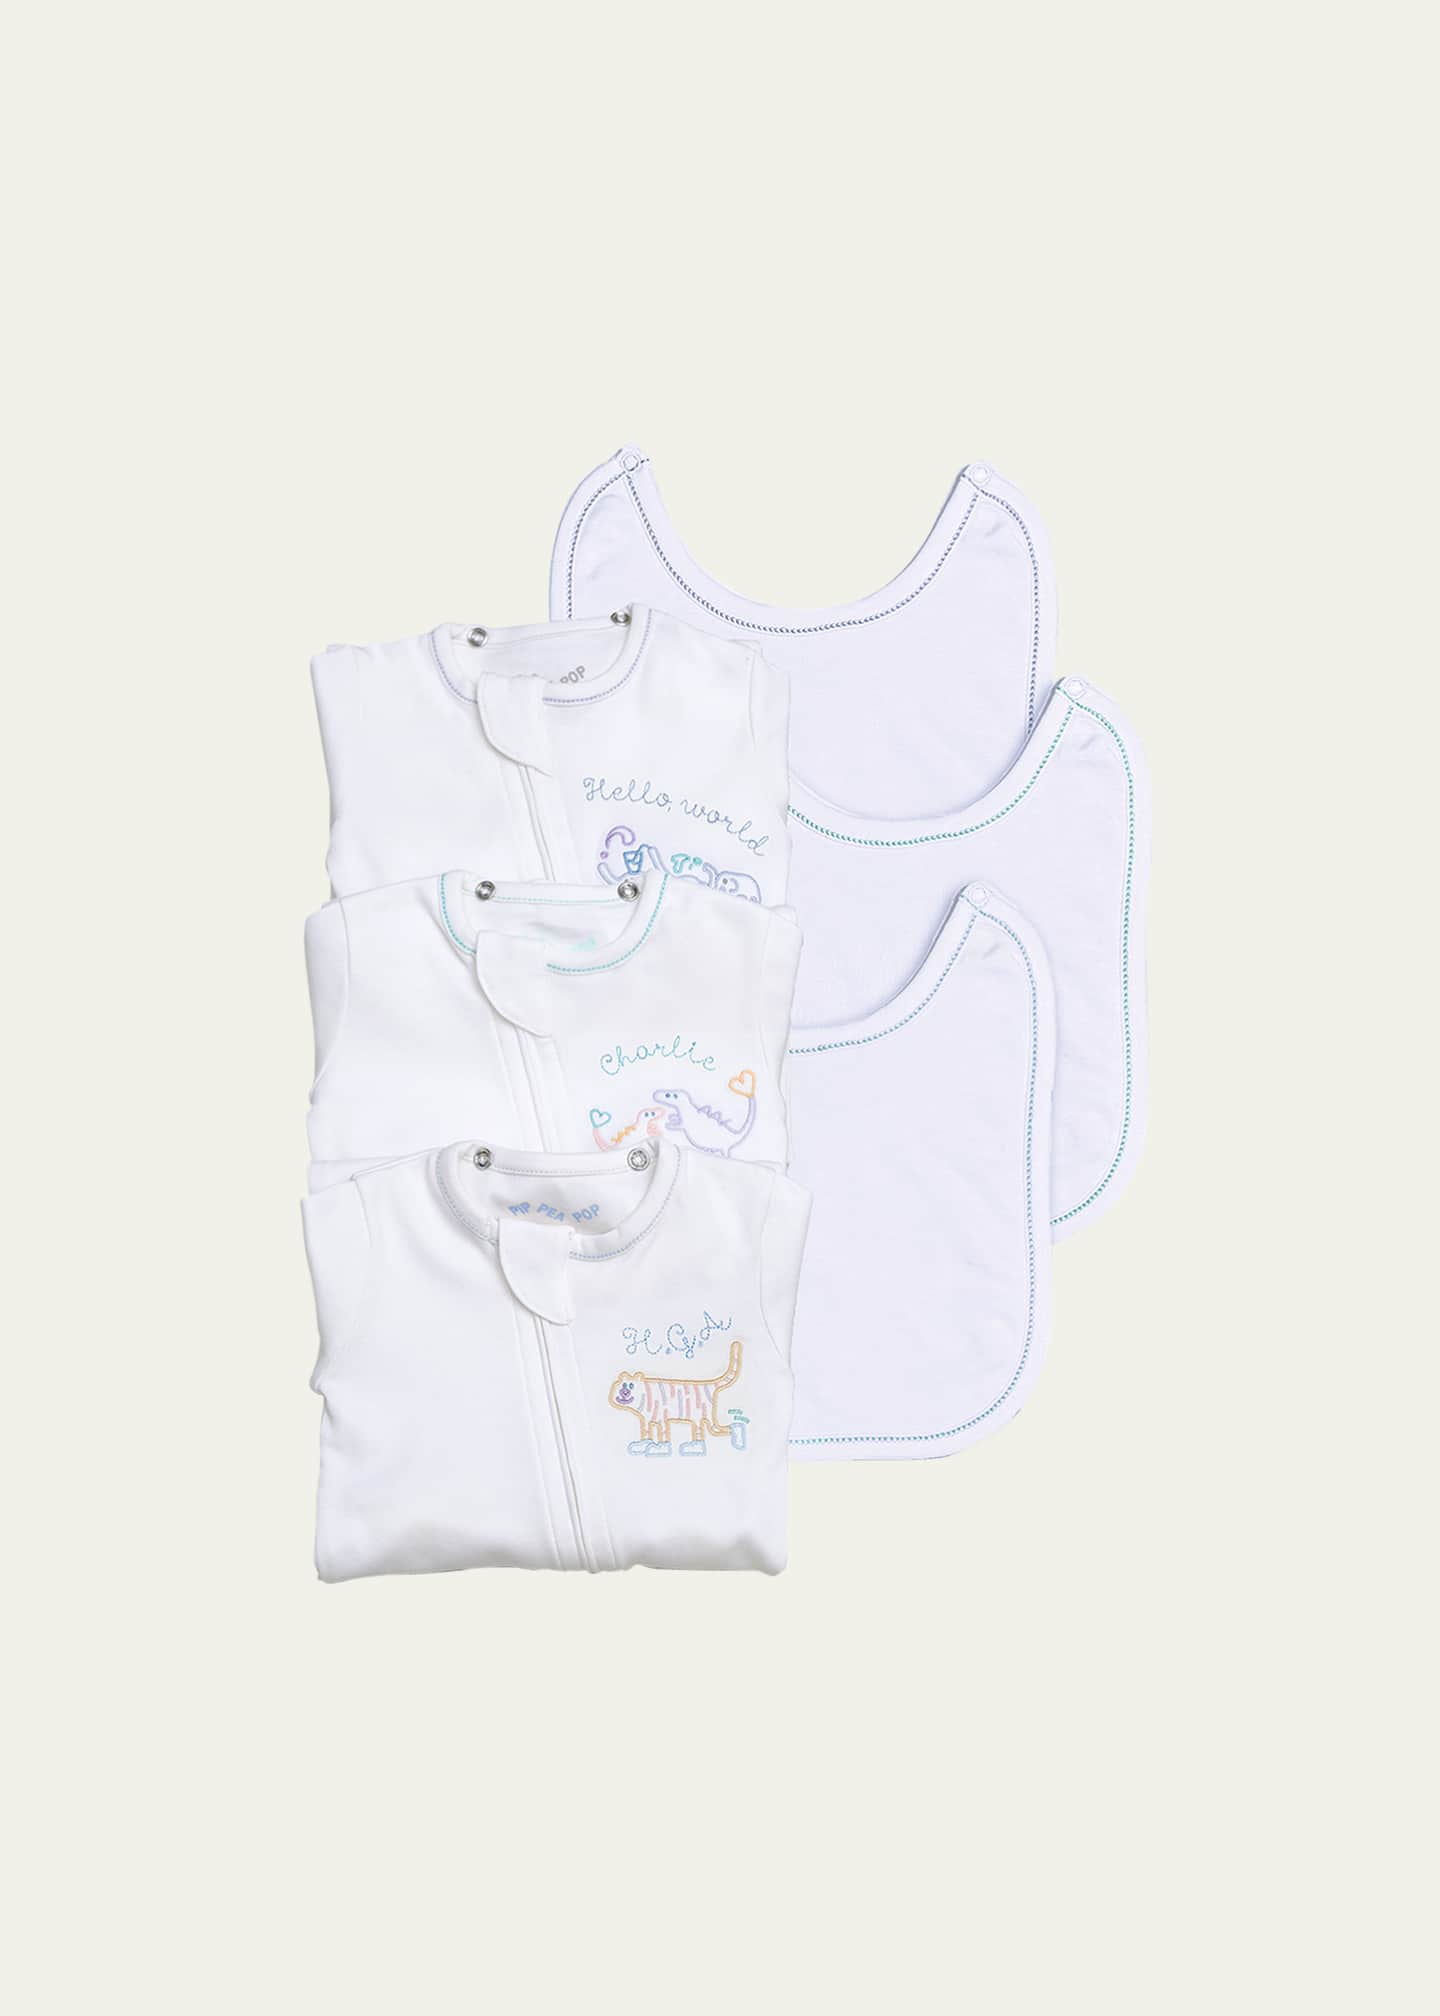 PiP PEA POP Baby Personalized Footed Bodysuit with attachable bib - Growing Bundle Image 1 of 5